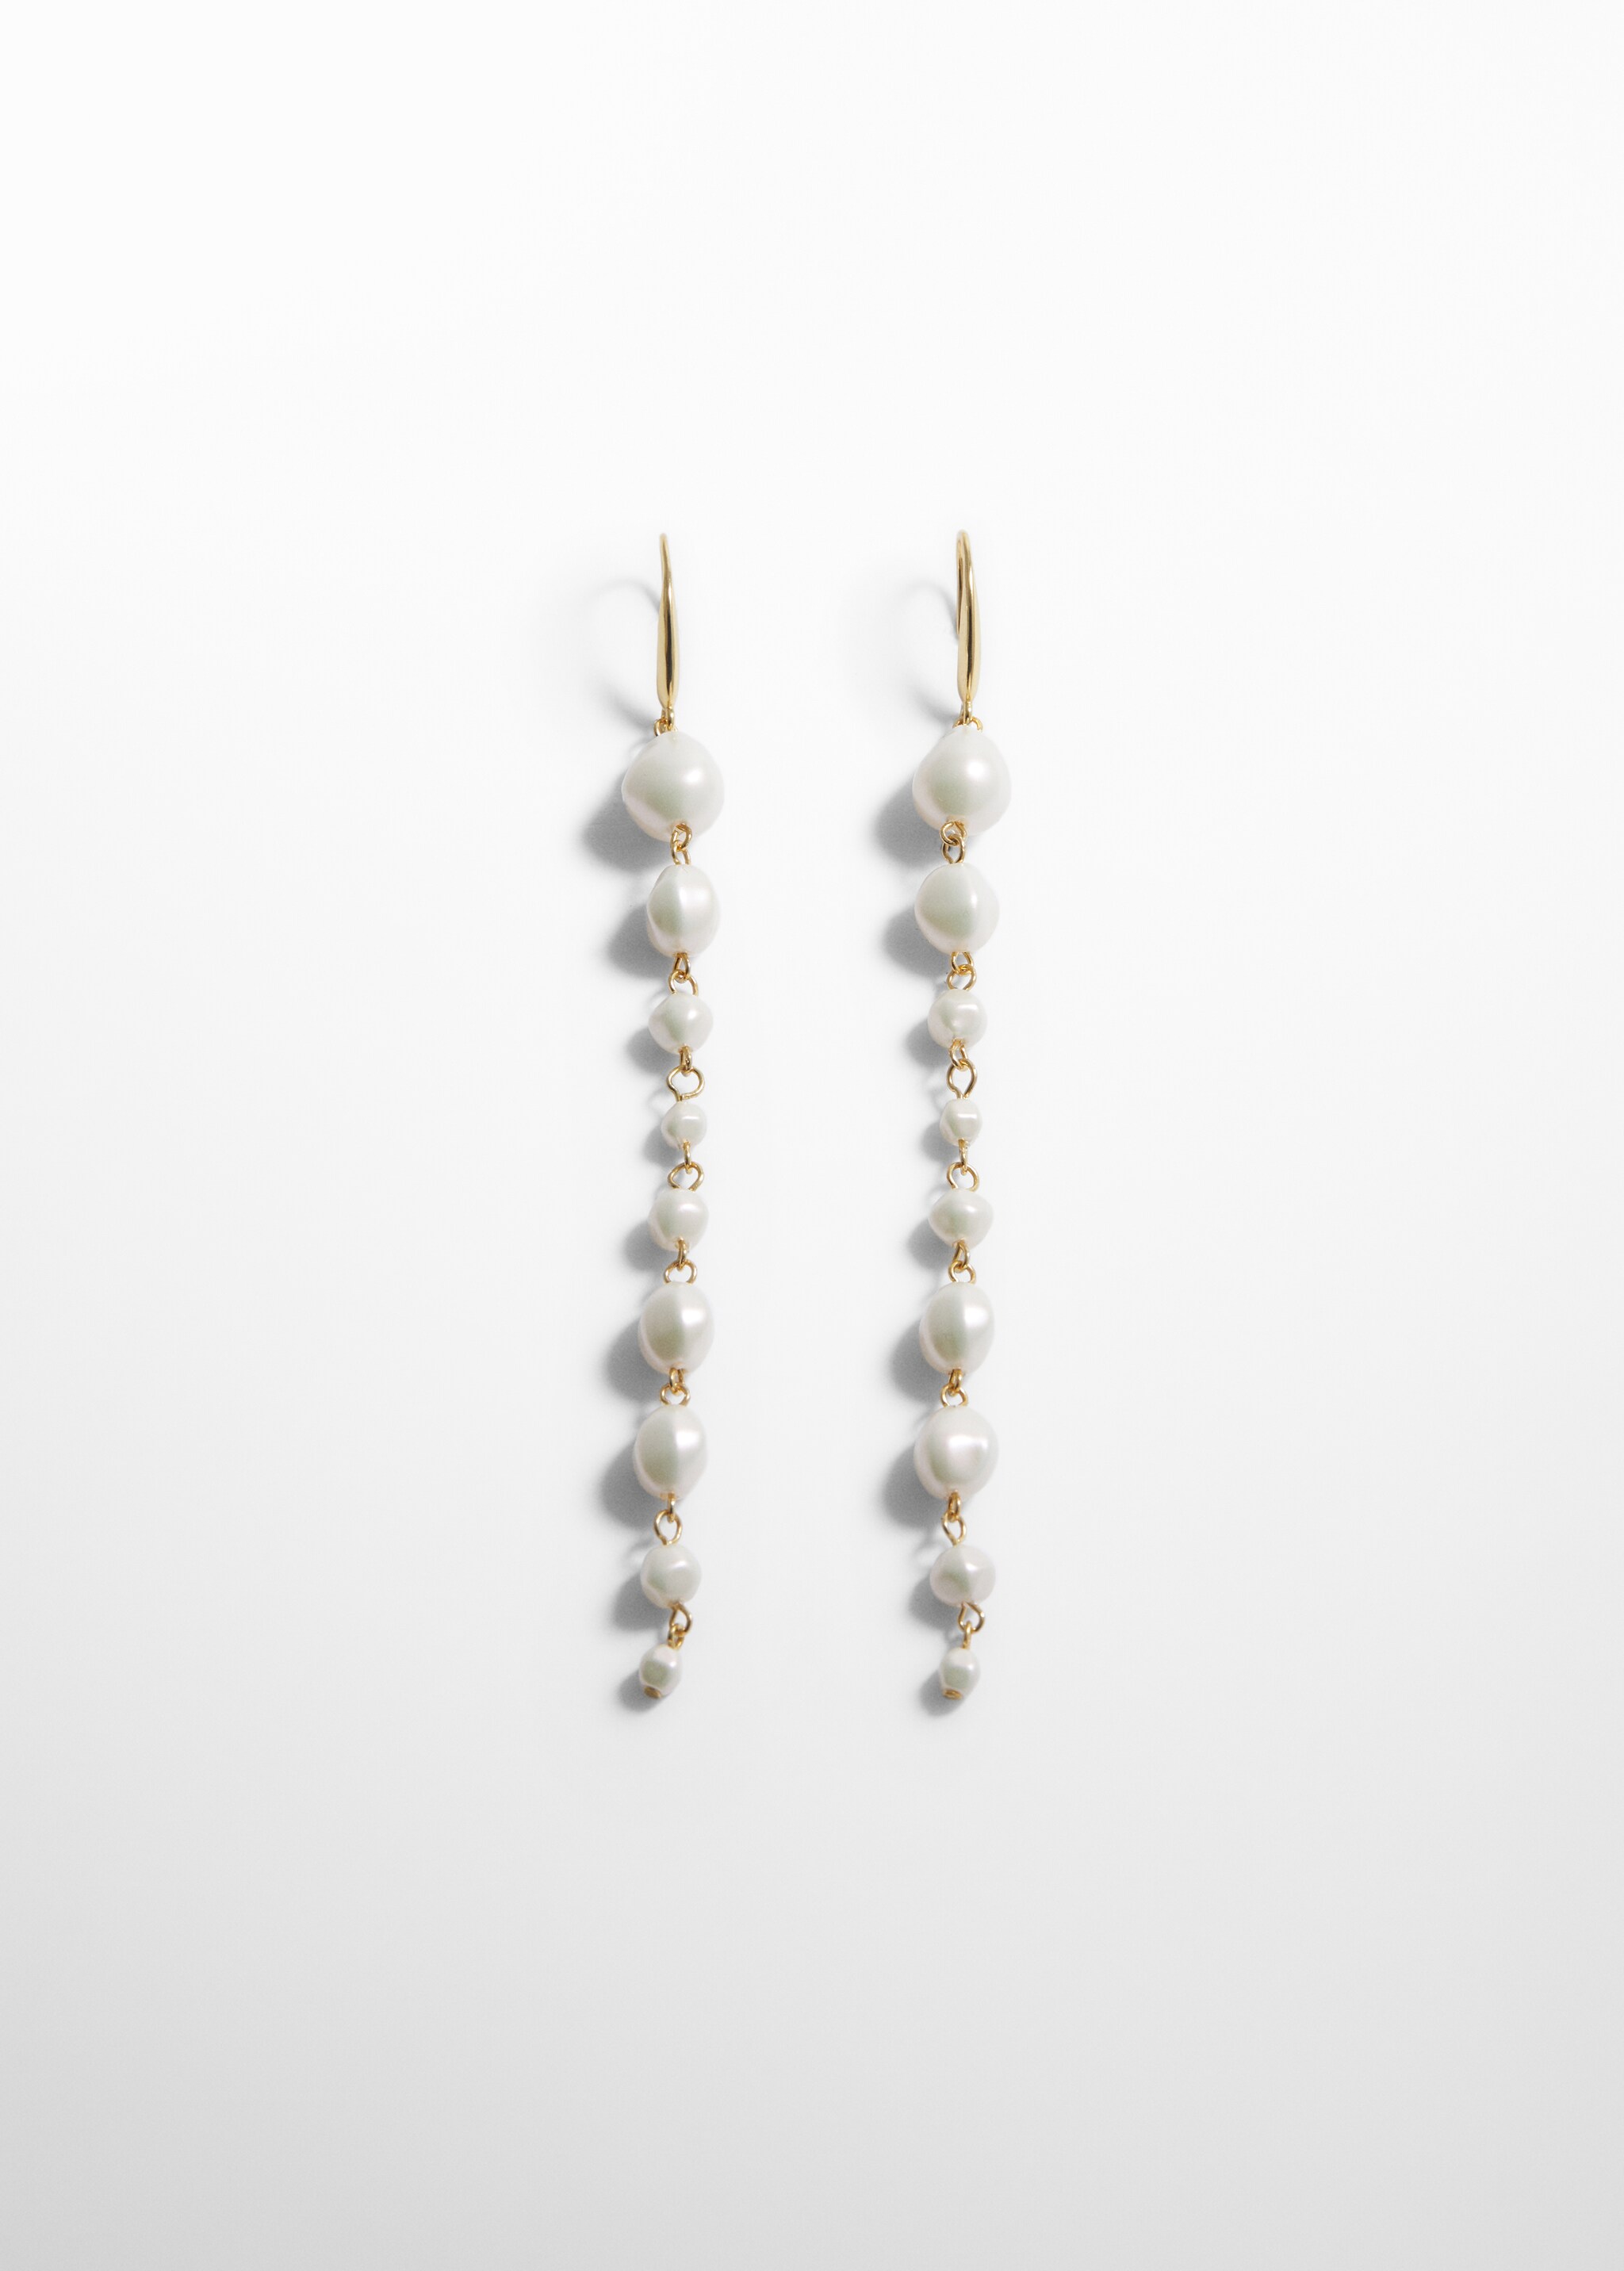 Pearl thread earrings - Article without model